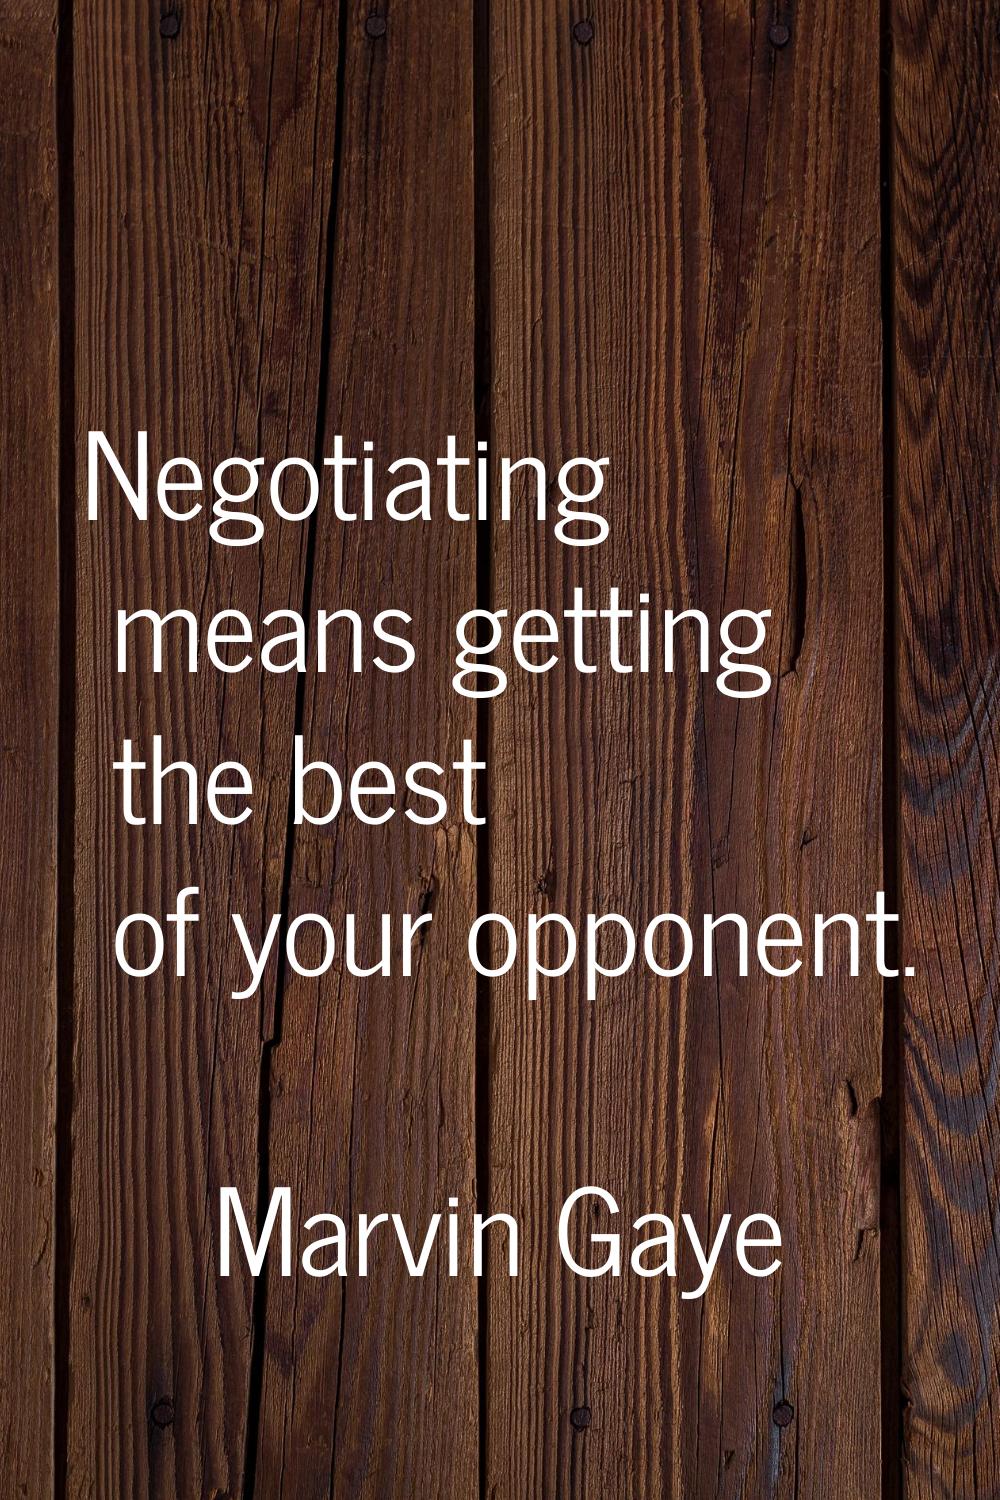 Negotiating means getting the best of your opponent.